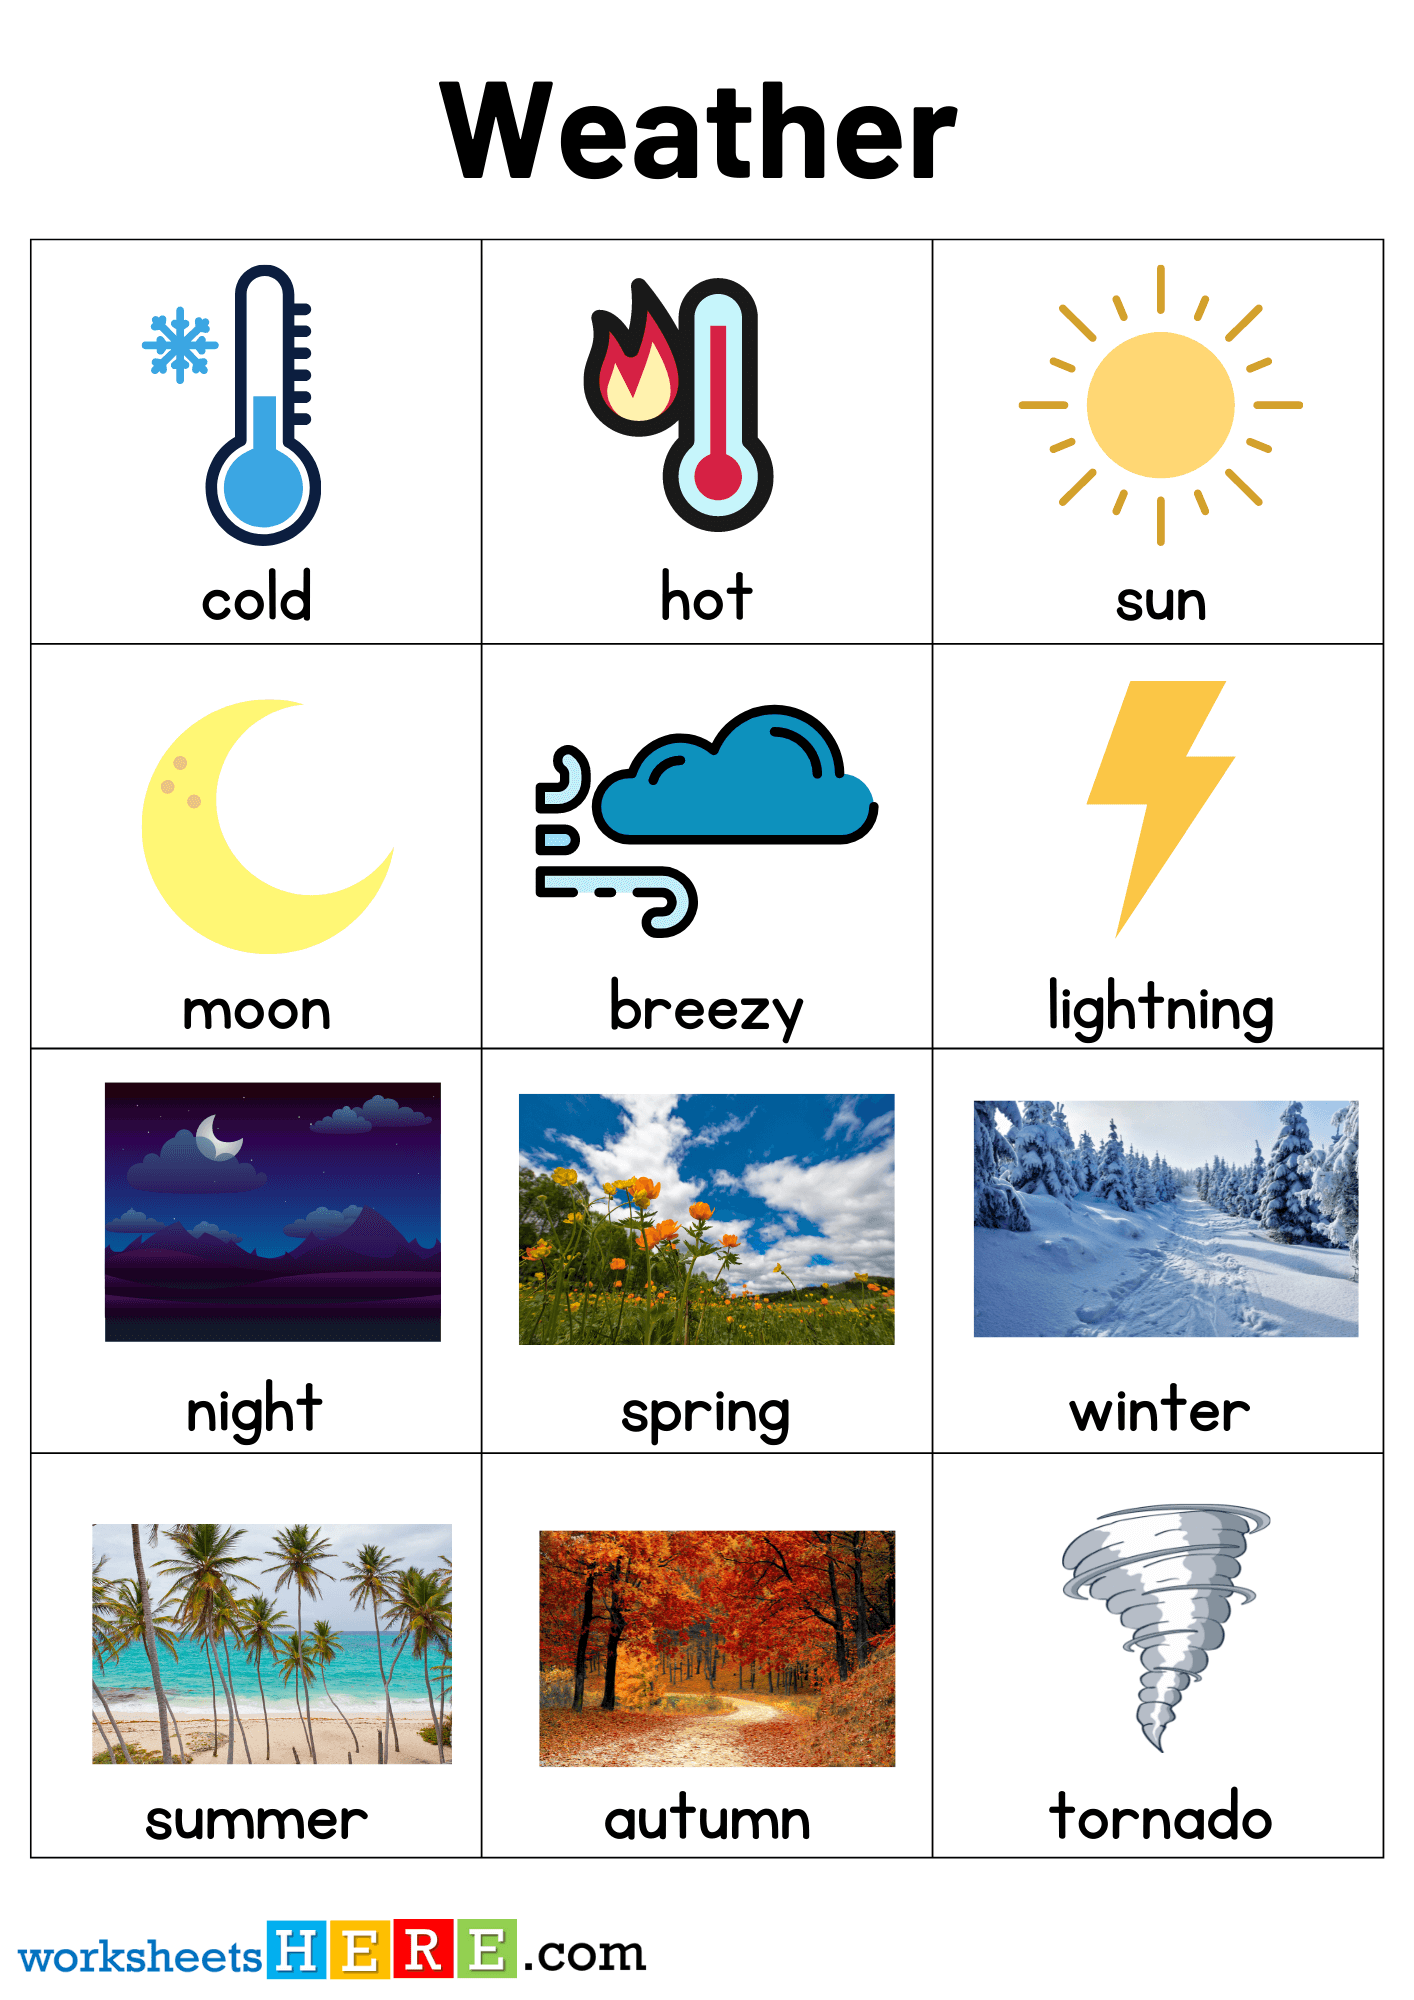 Weather related Words with Pictures, Weather Flashcards PDF Worksheets For Kindergarten